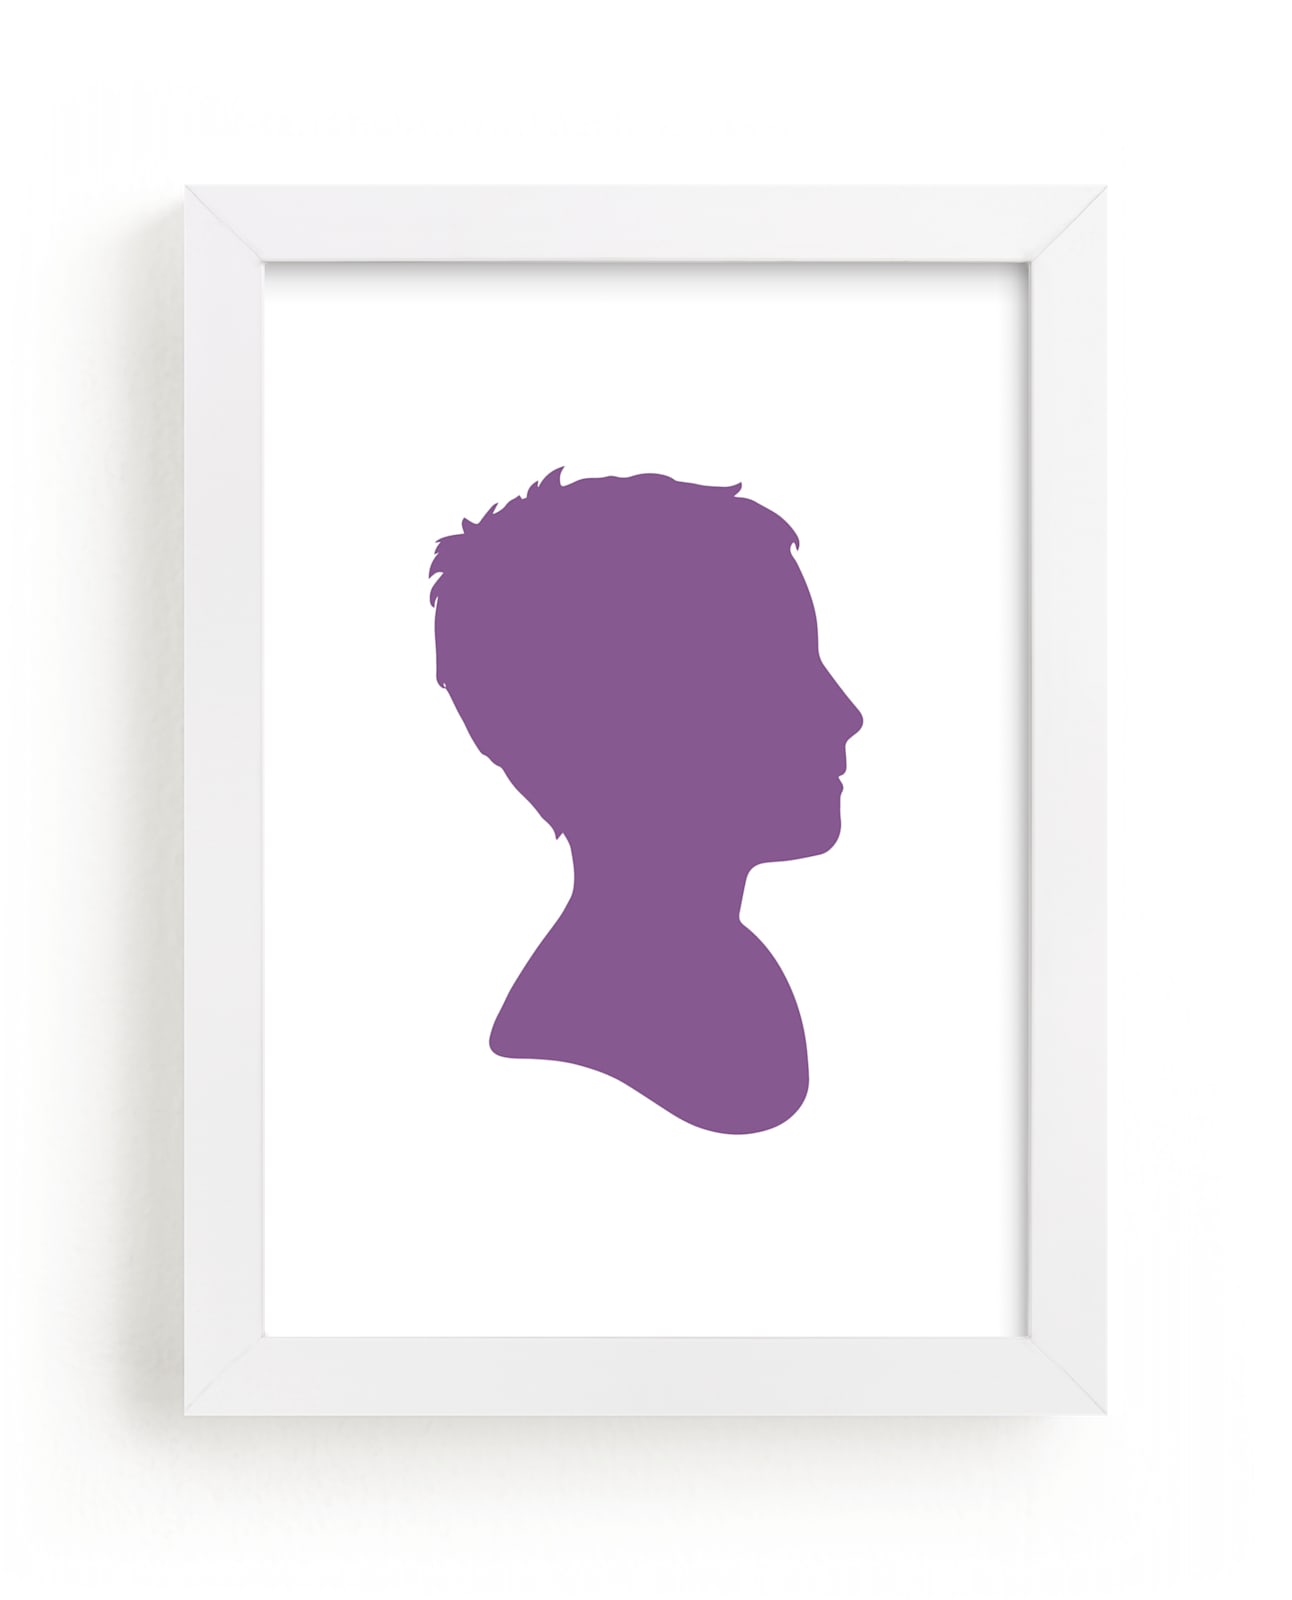 This is a purple silhouette art by Minted called Custom Silhouette Art.